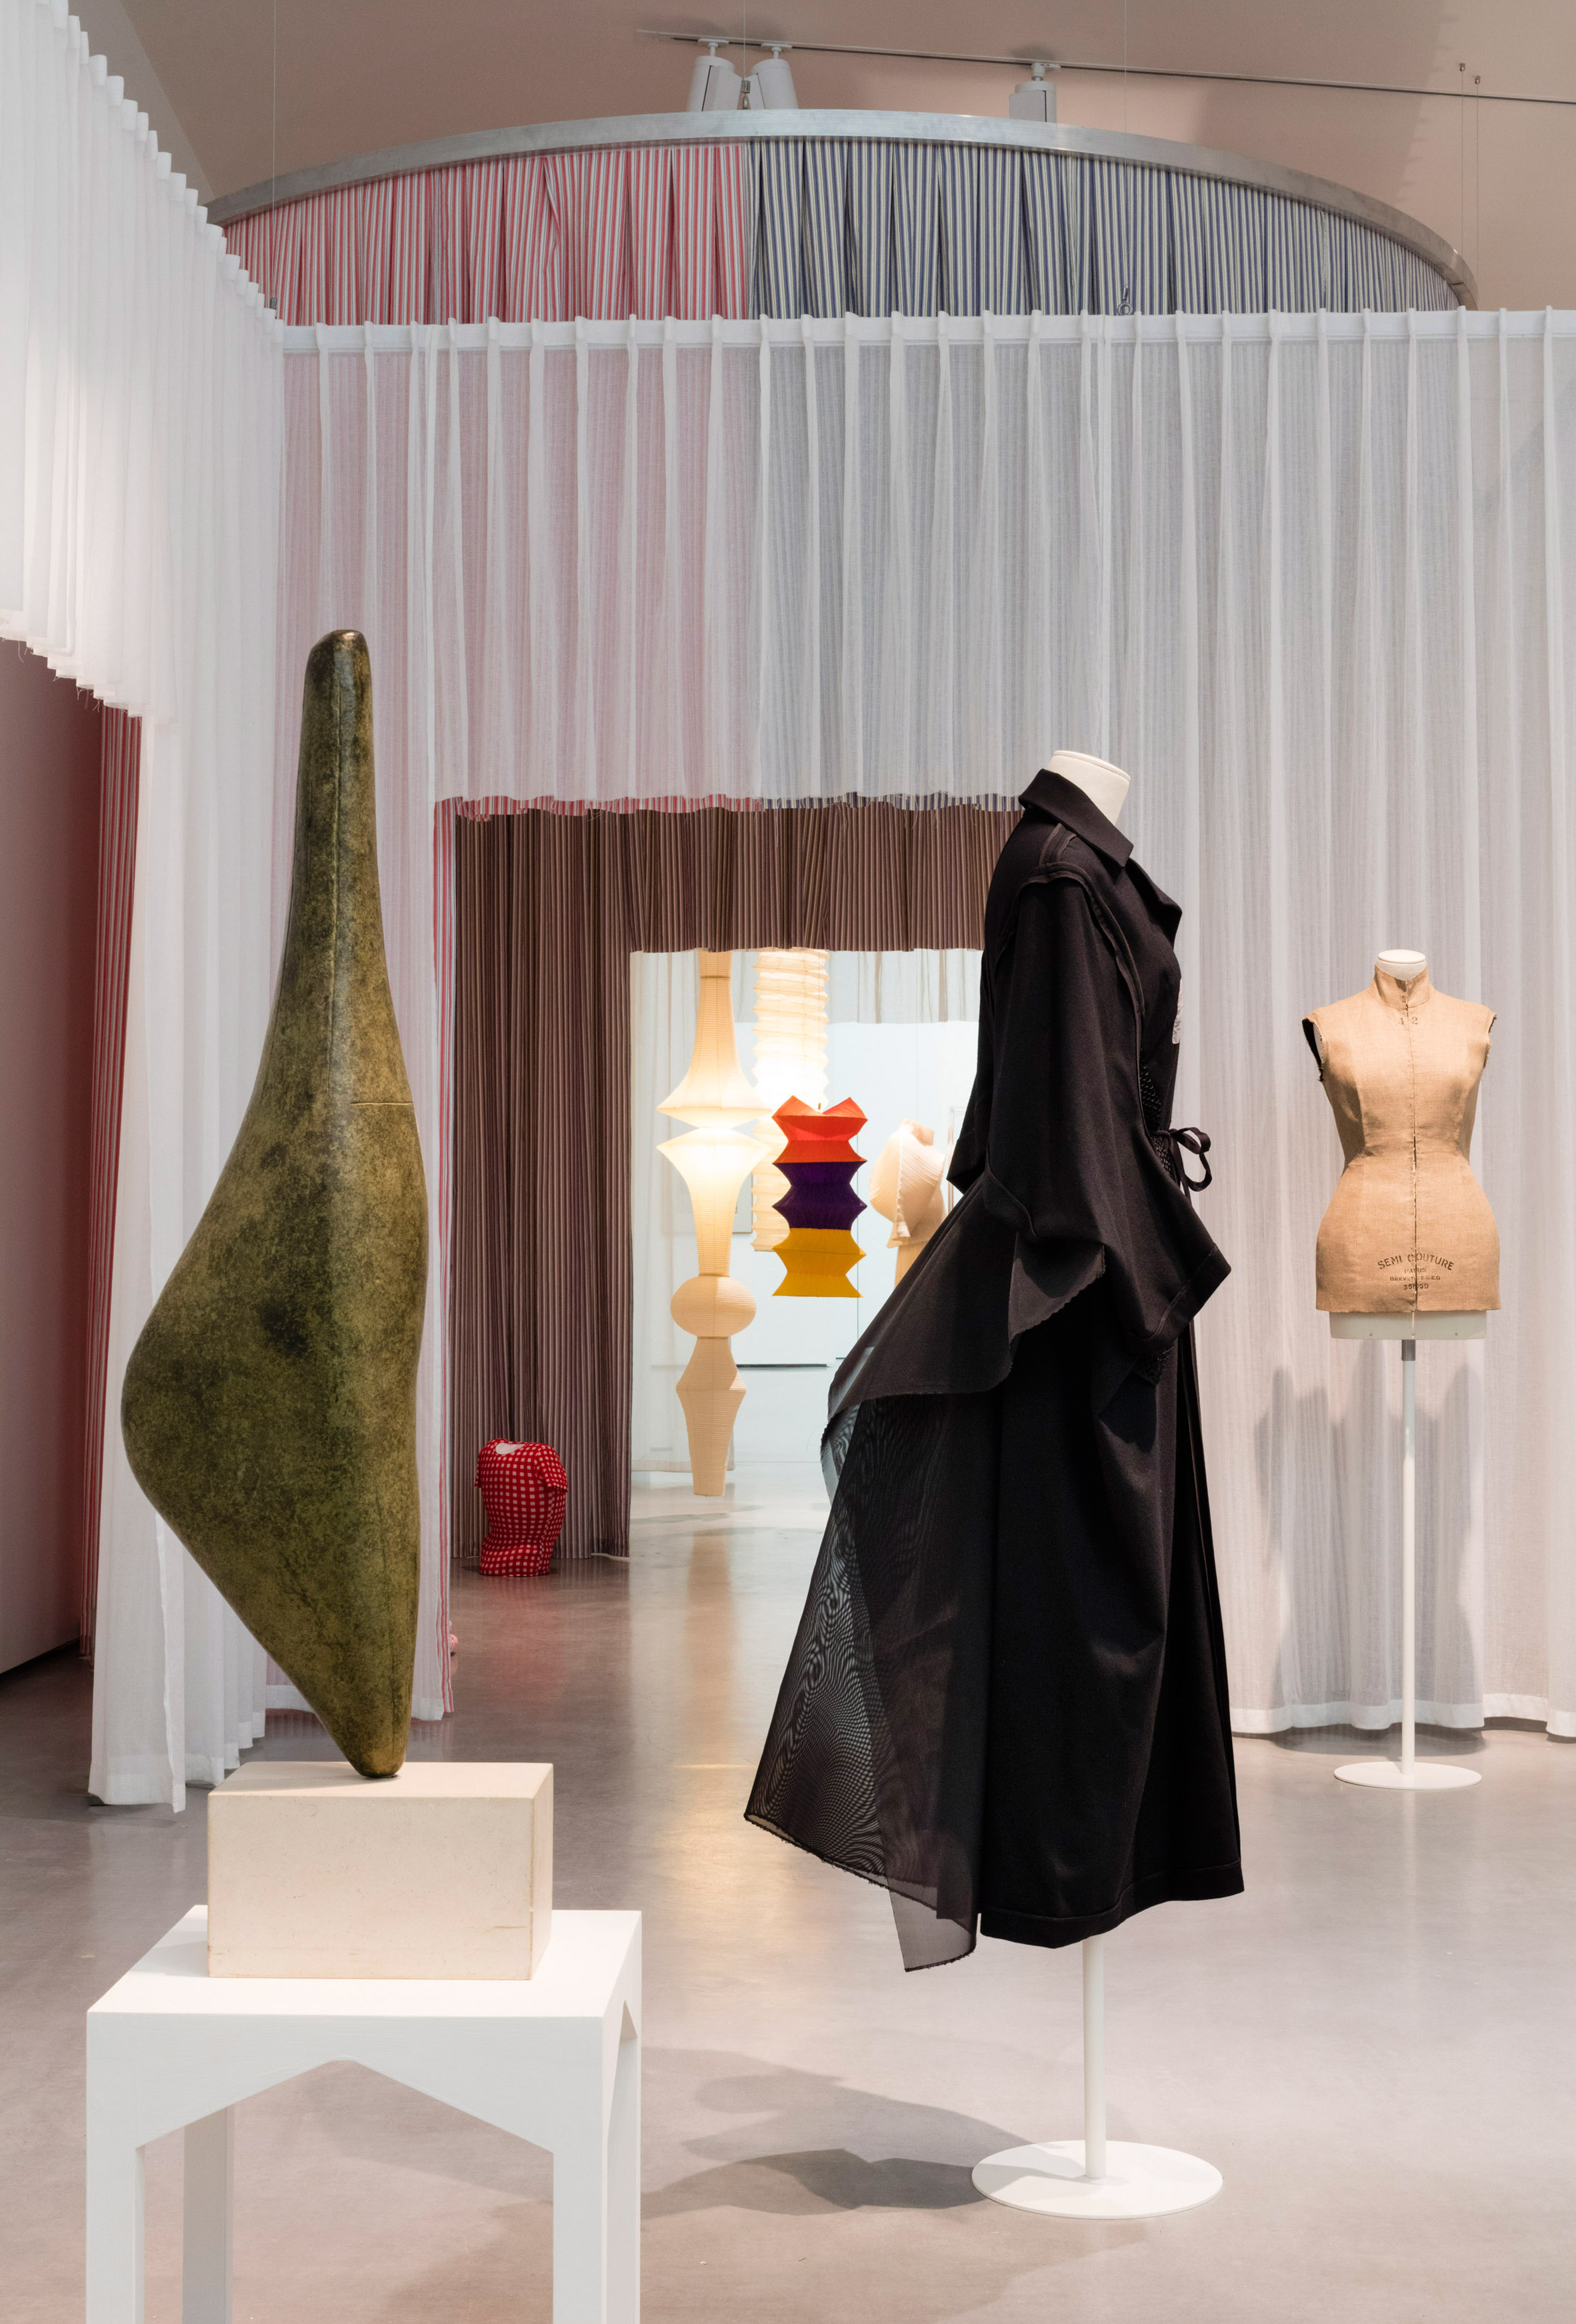 Disobedient Bodies by JW Anderson at The Hepworth